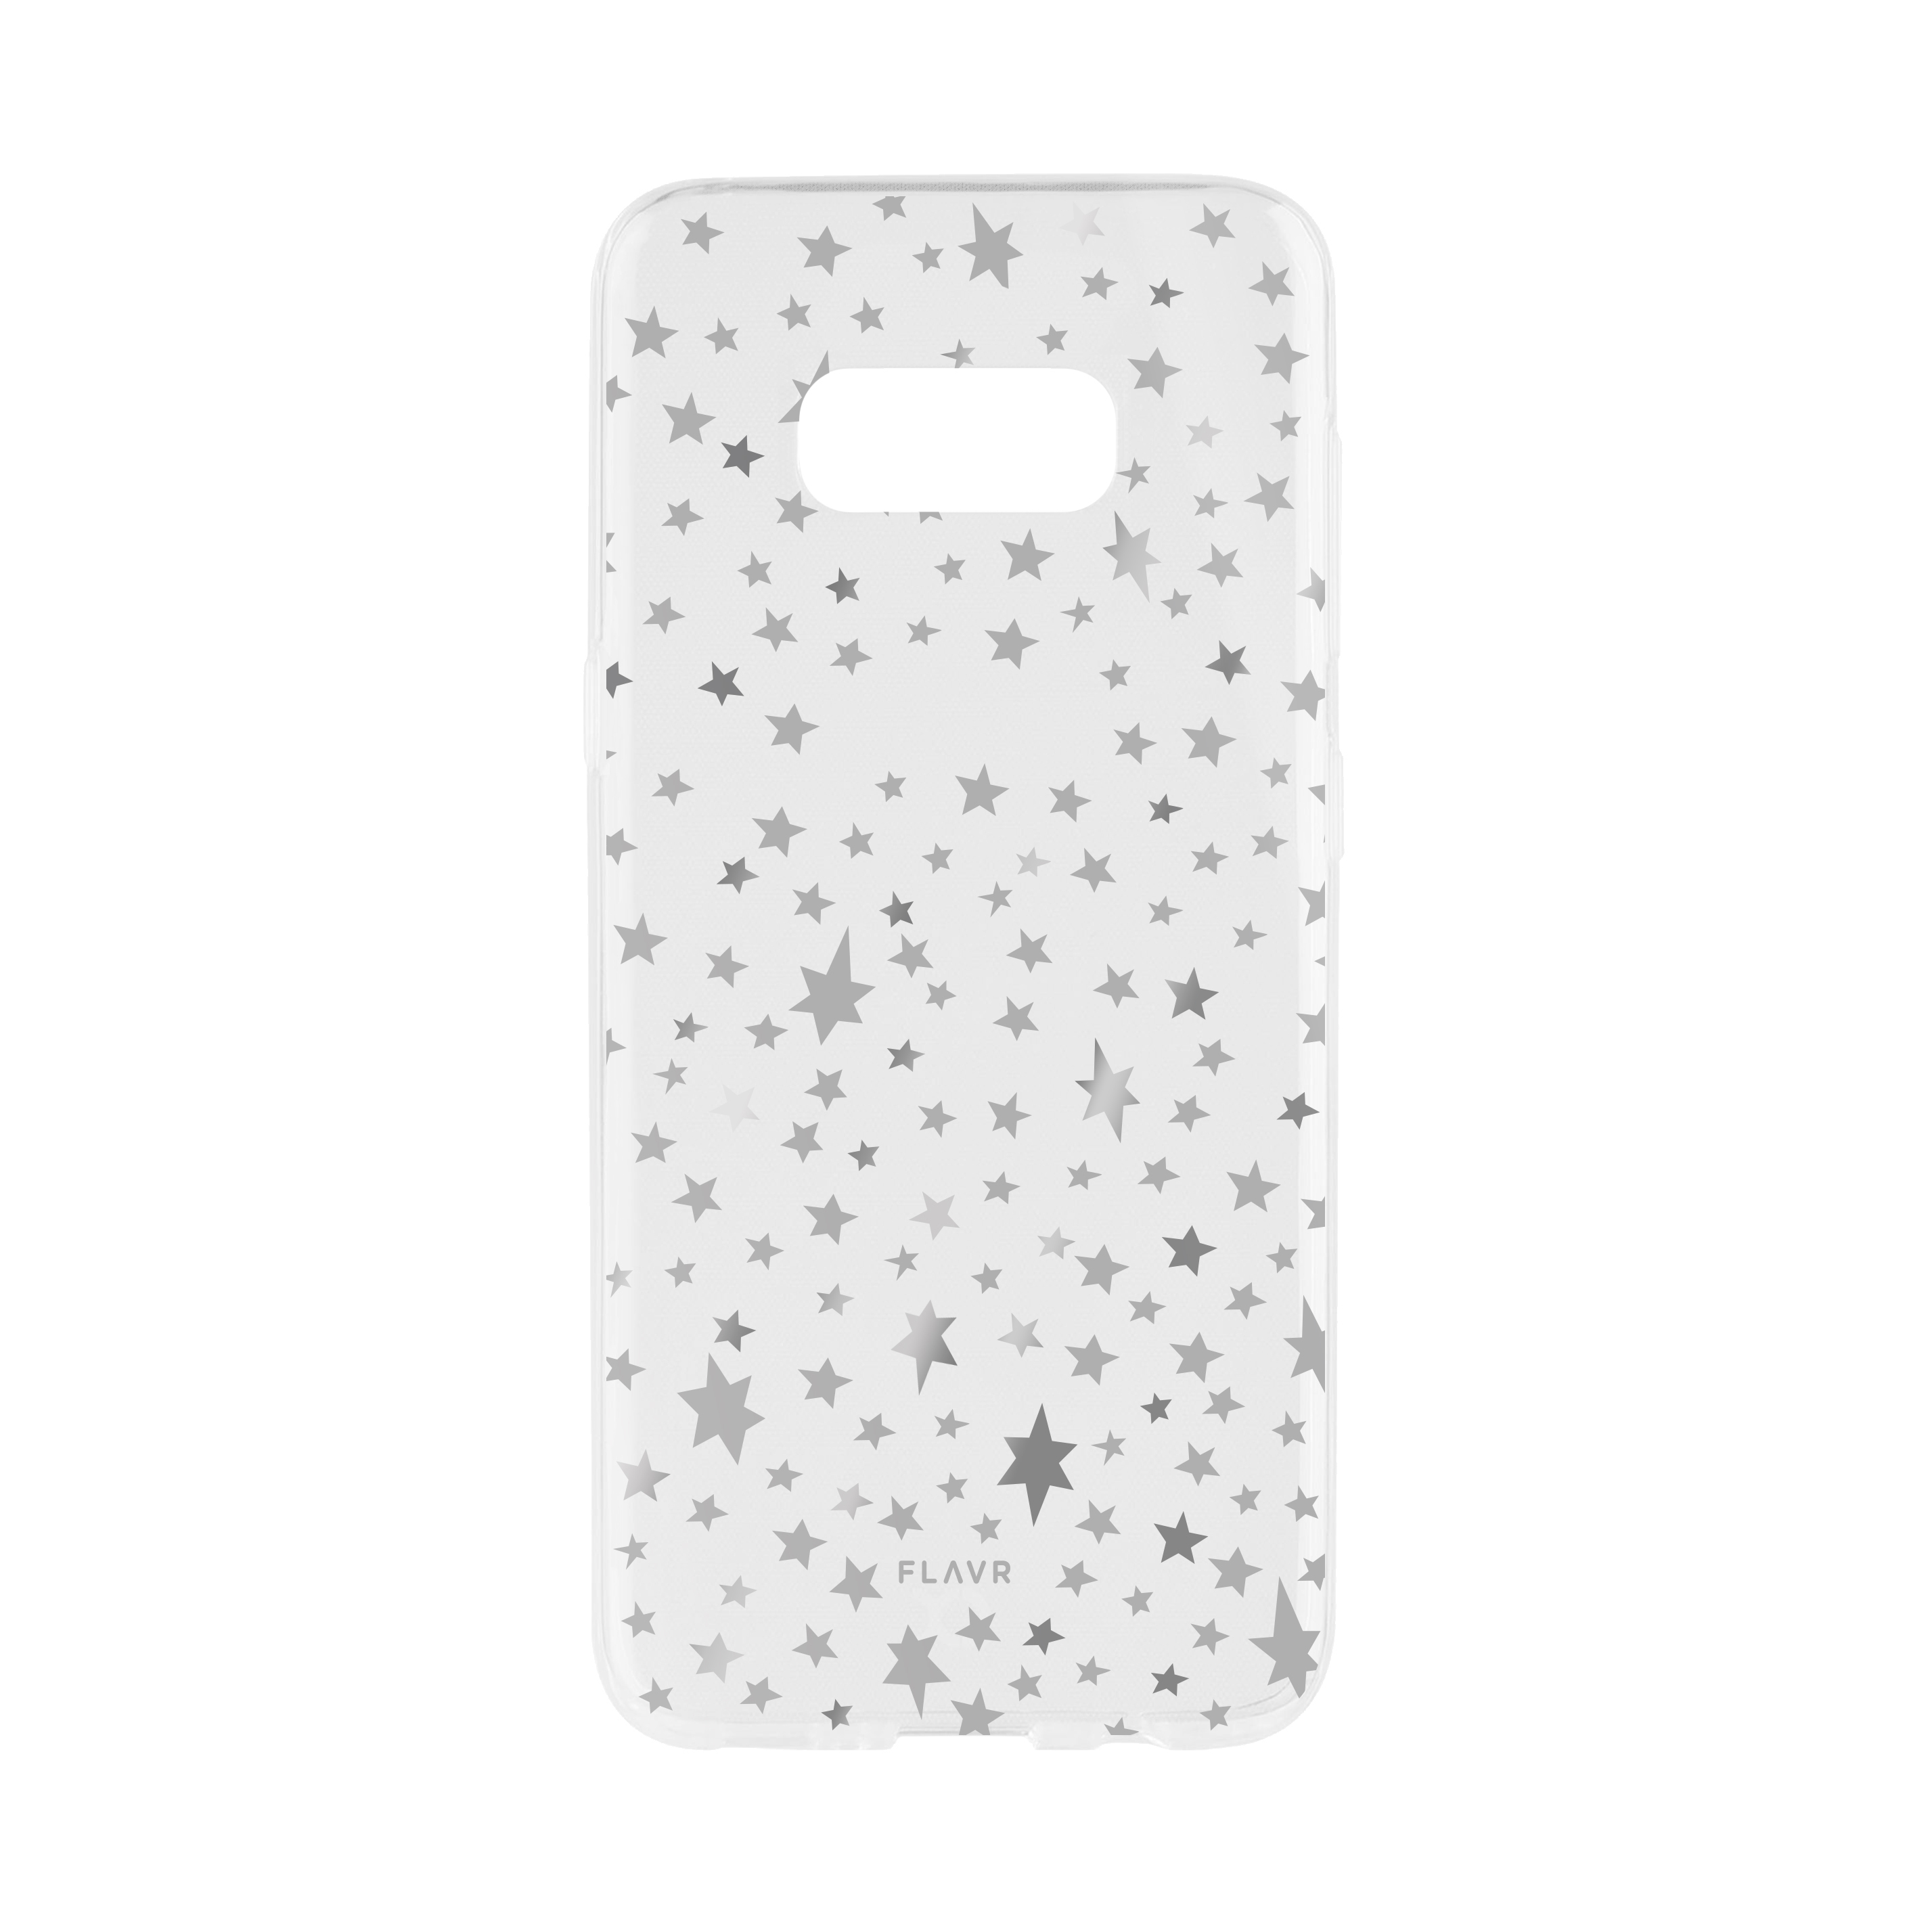 FLAVR iPlate Starry Nights, COLOURFUL 8, SAMSUNG, GALAXY Backcover, NOTE